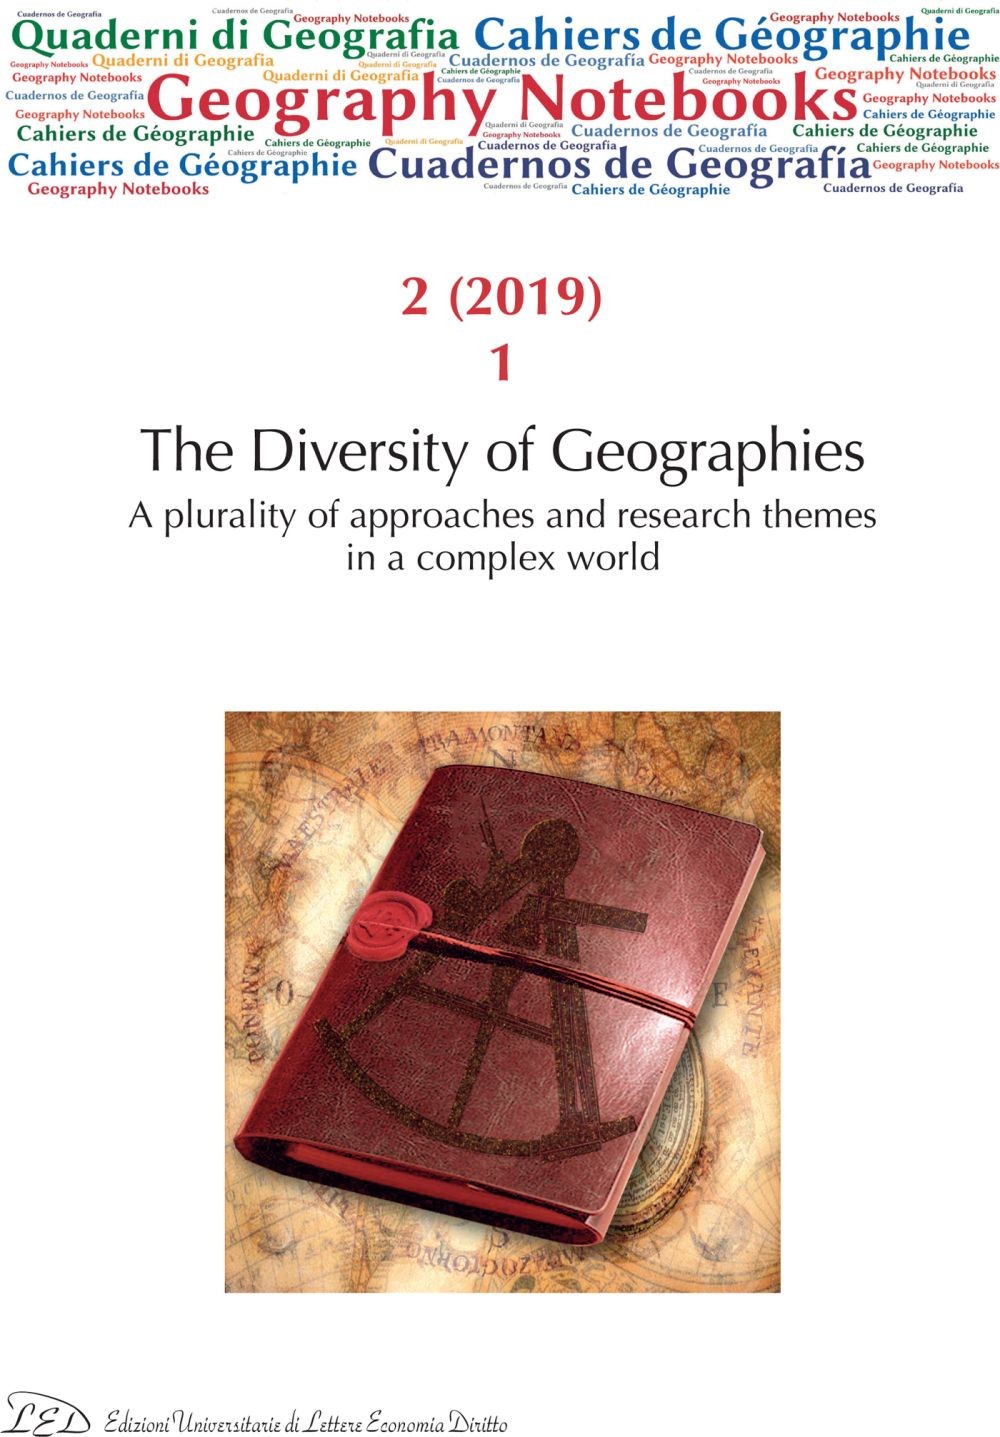 Geography Notebooks. Vol 2, No 1 (2019). The Diversity of Geographies. A plurality of approaches and research themes in a complex world - Librerie.coop